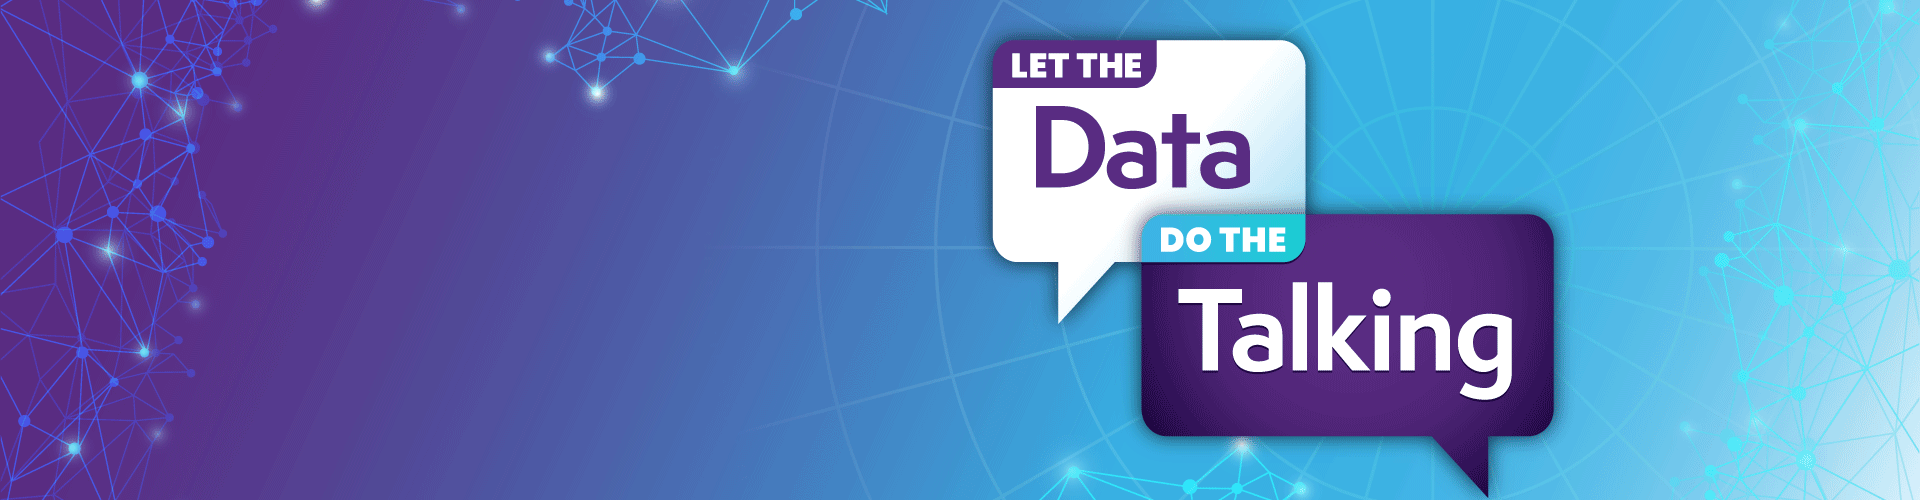 let the data do the talking banner